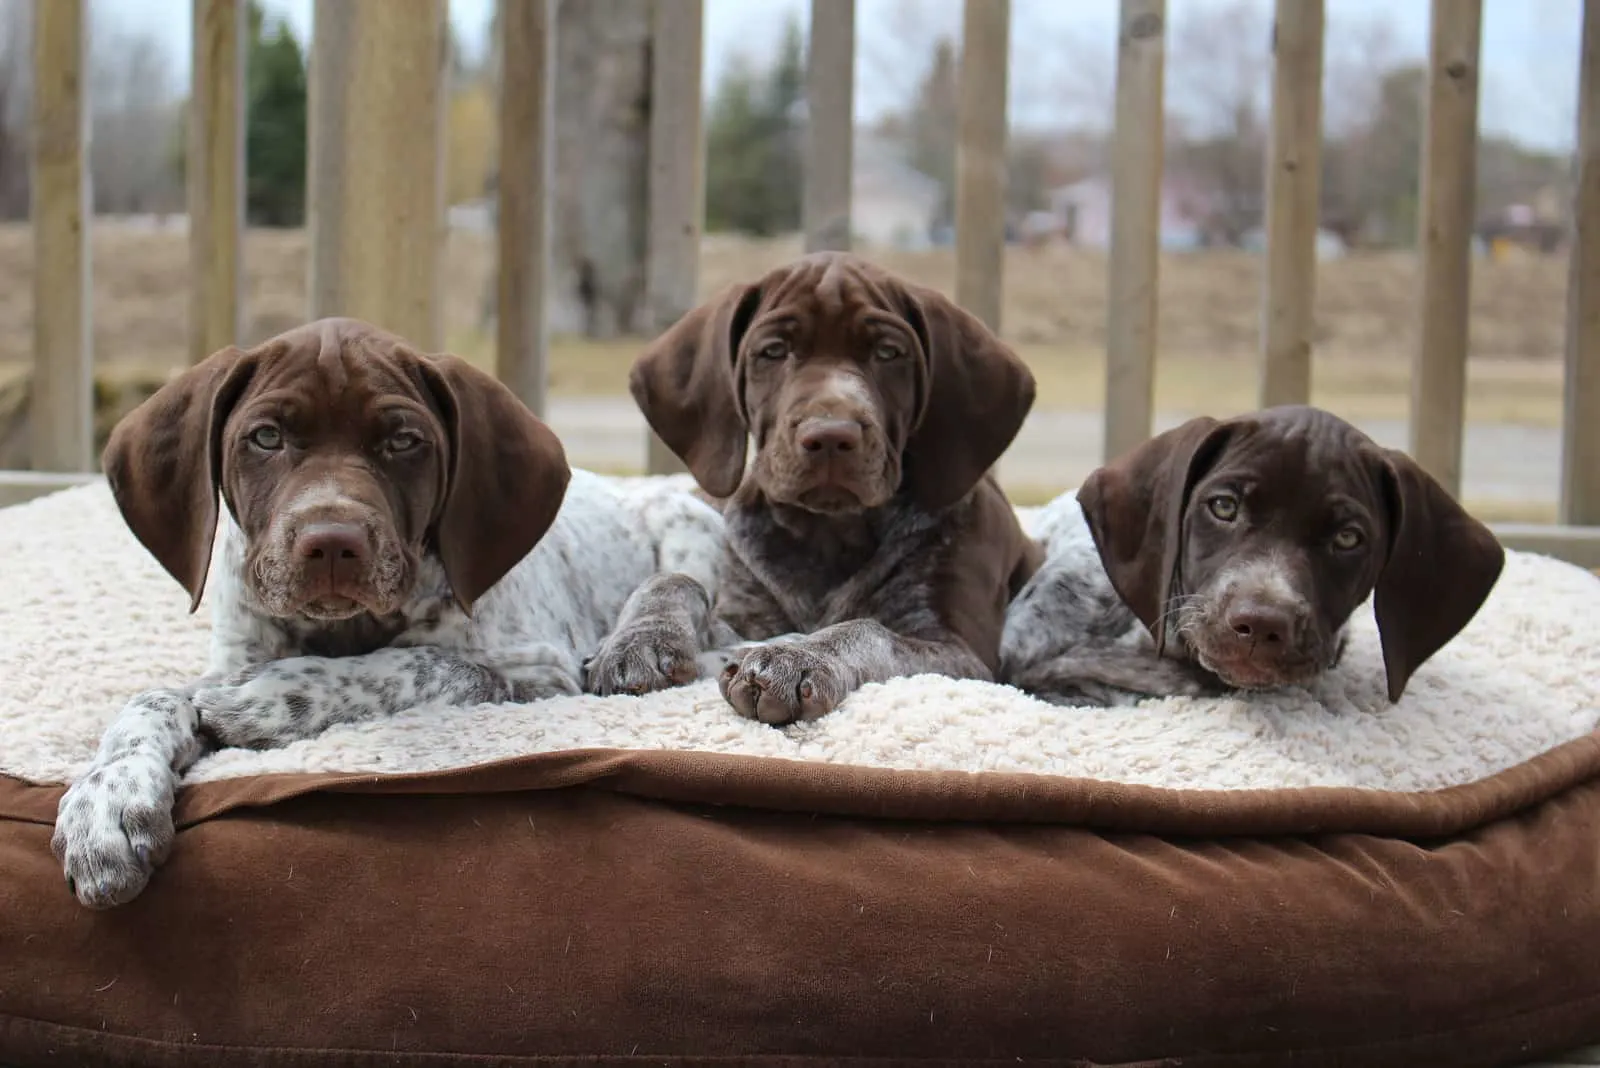 Tree German Shorthaired Pointer puppies looking at camera